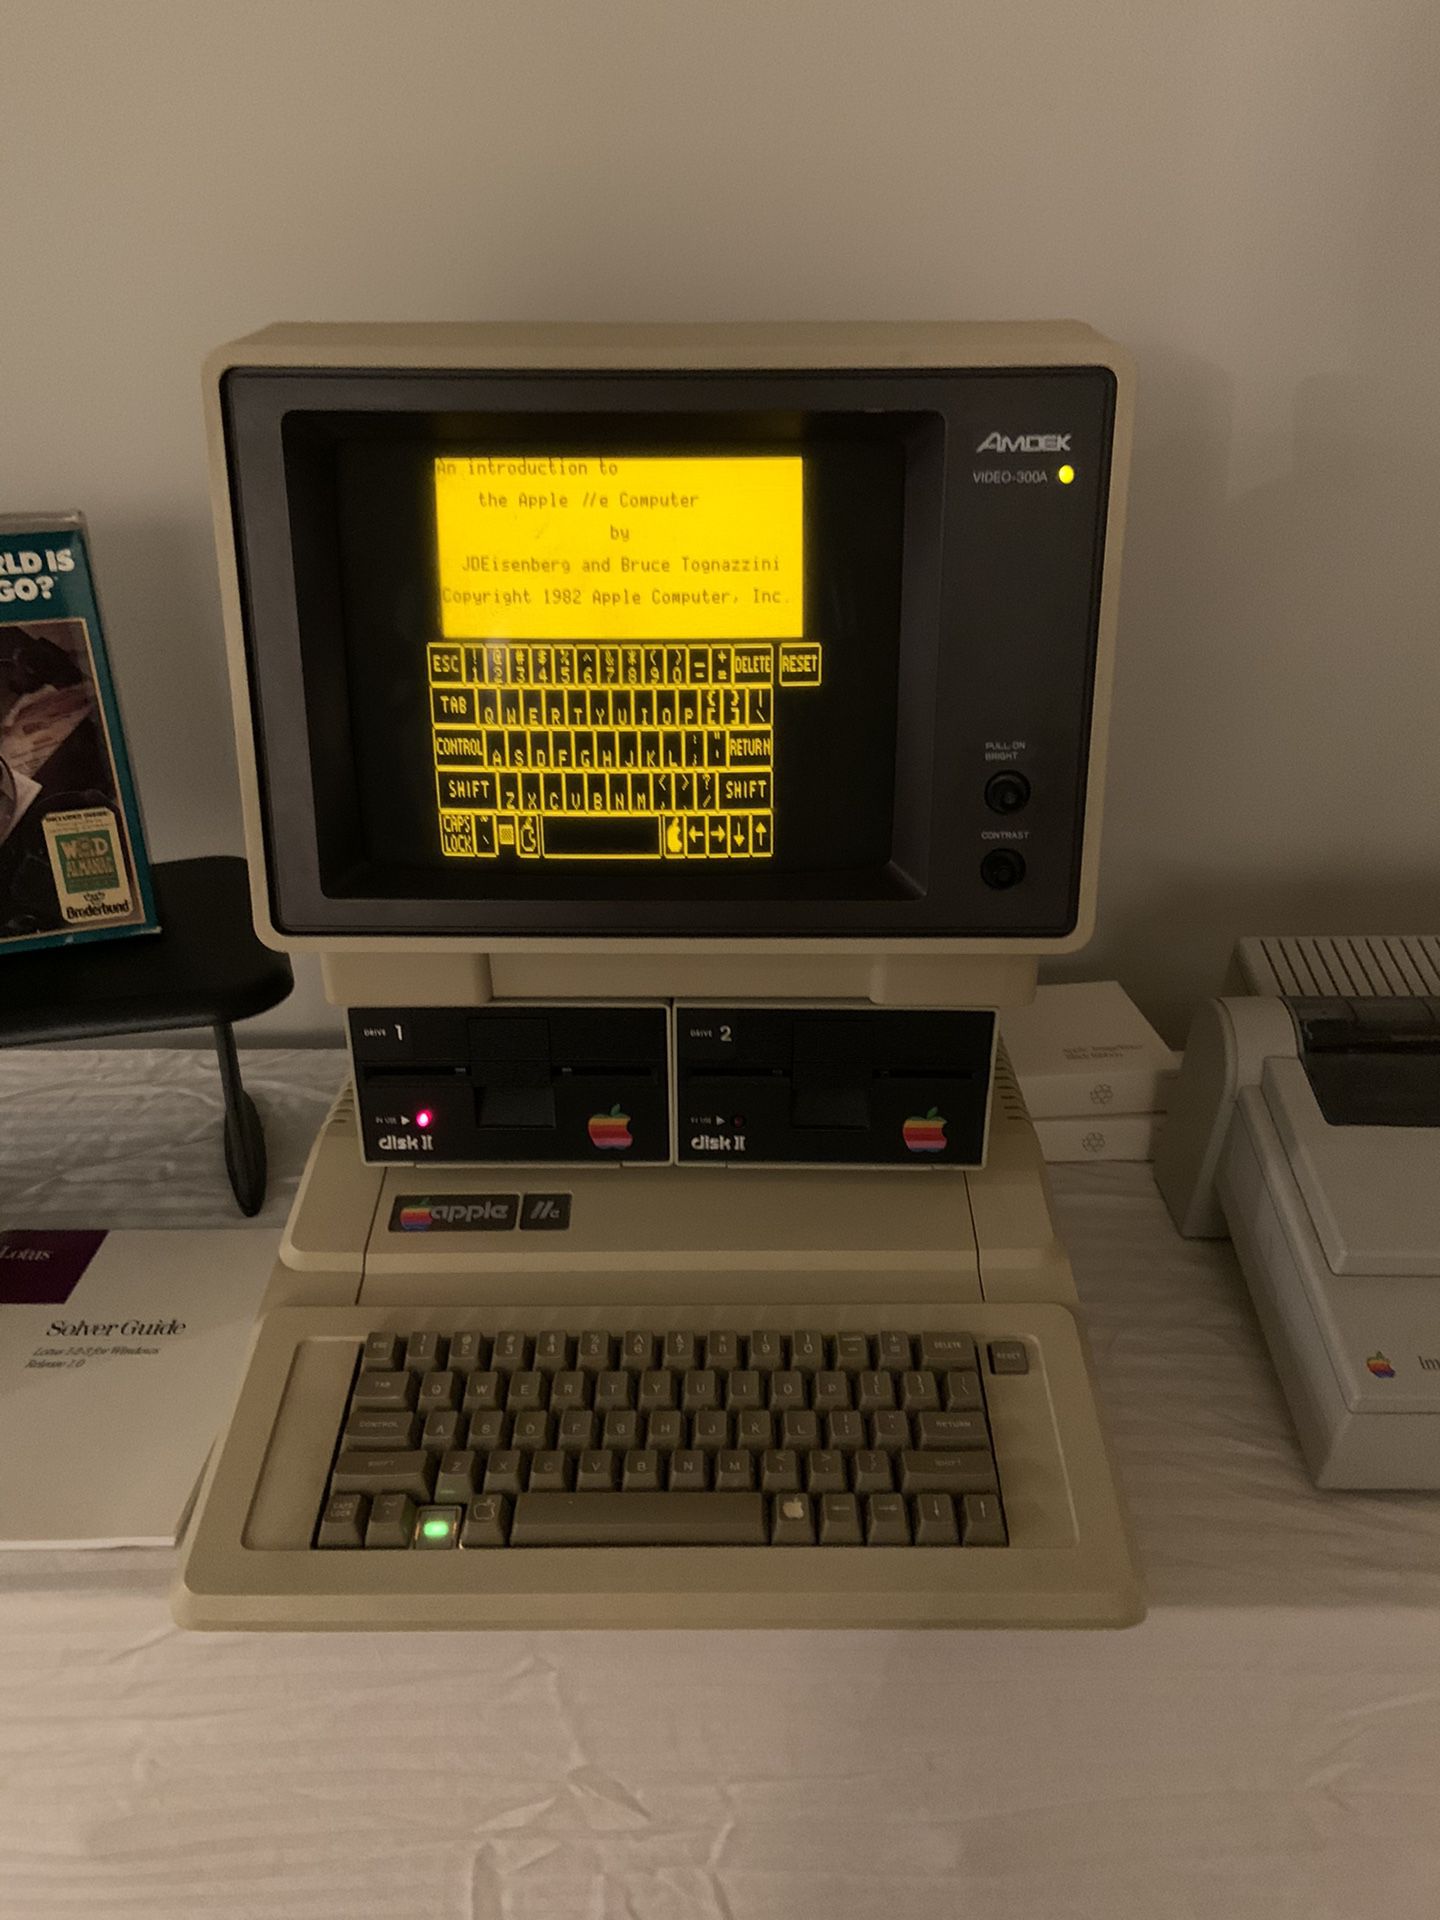 Apple IIe Complete Computer System Includes Many Upgrades and Additions Plus a Vast Collection of Apple IIe Software Programs and Games